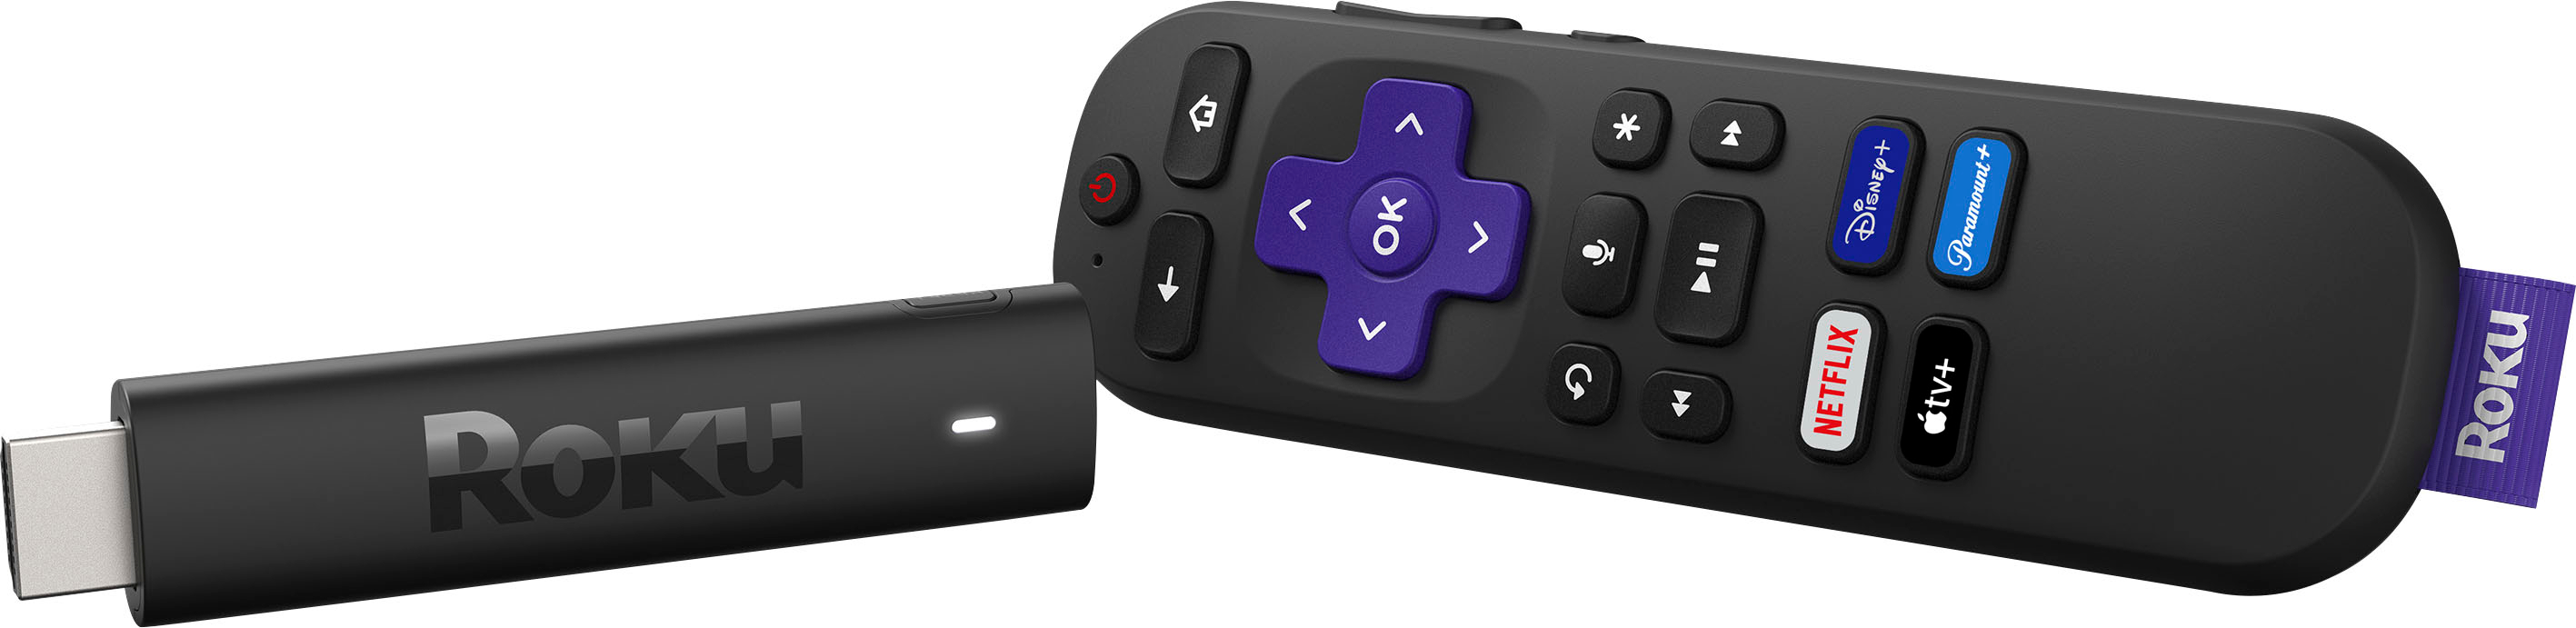 Roku - Streaming Stick 4K | Streaming Device with Voice Remote and Long-Range Wi-Fi - Black